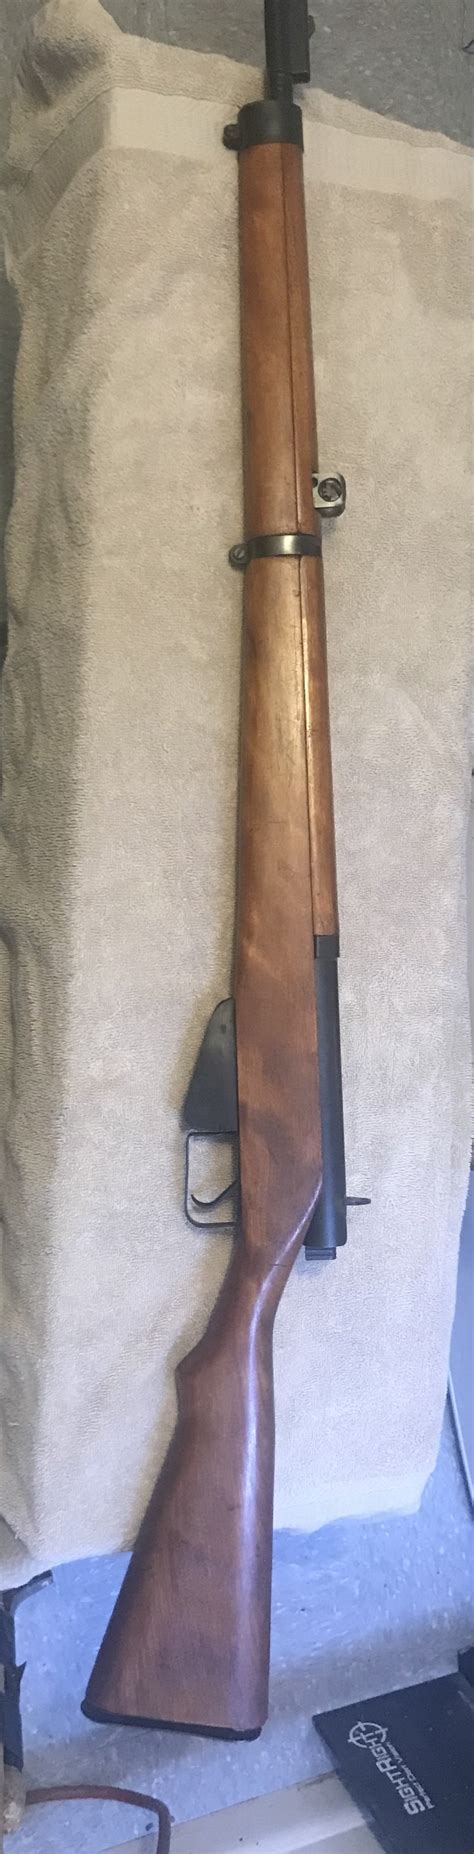 1944 Long Branch Training Rifle Gunboards Forums